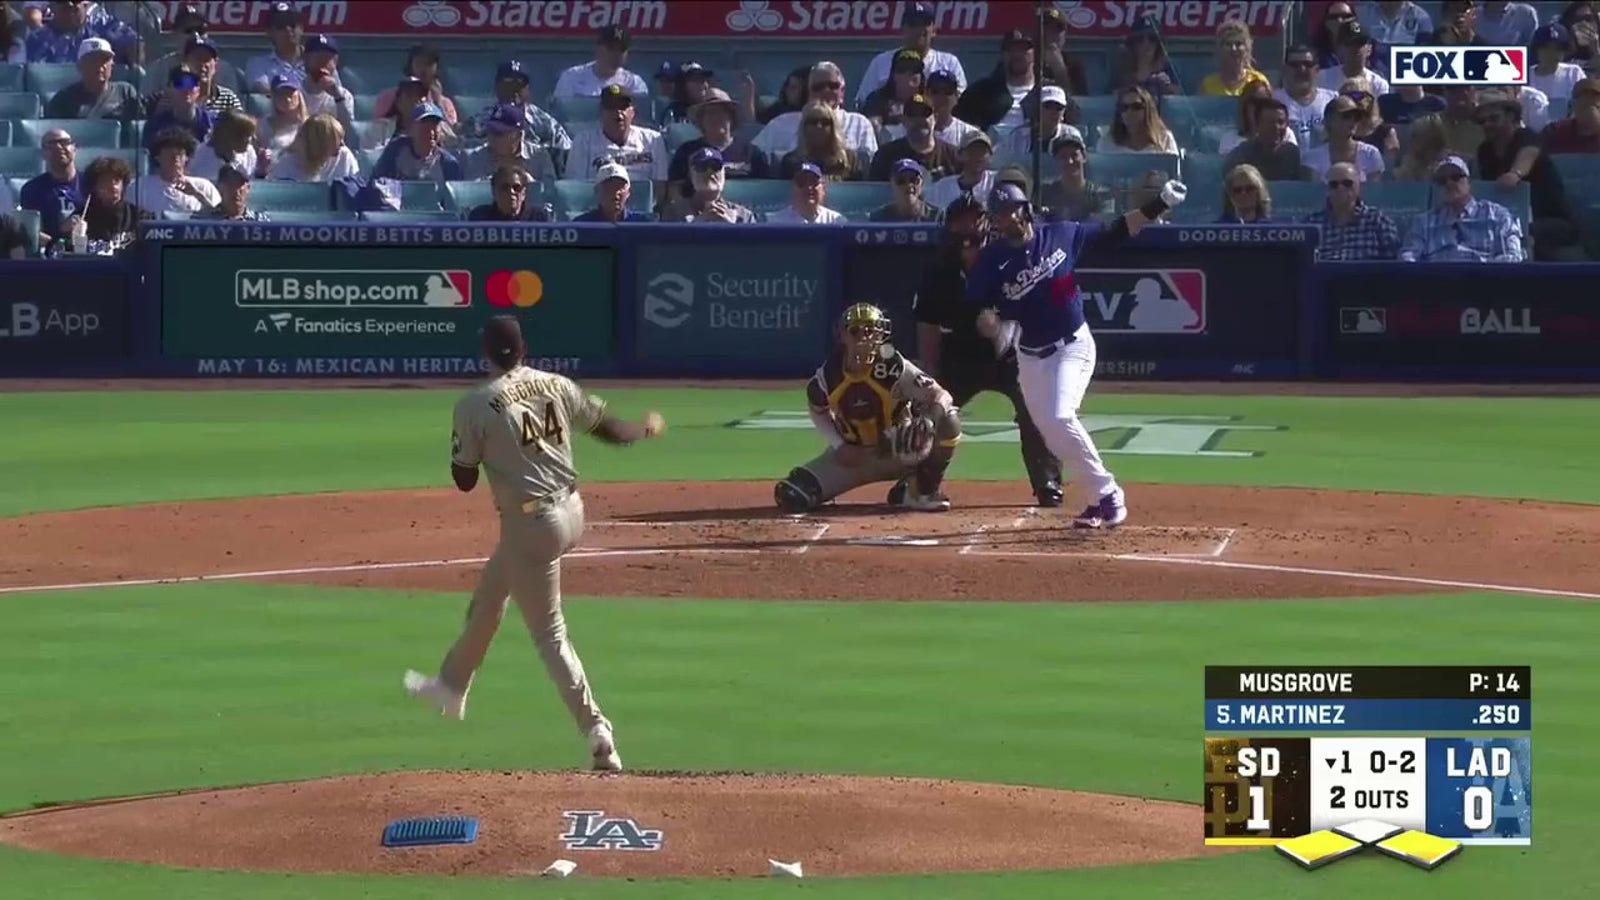 JD Martinez takes the field, the Dodgers soon take the lead against Padres